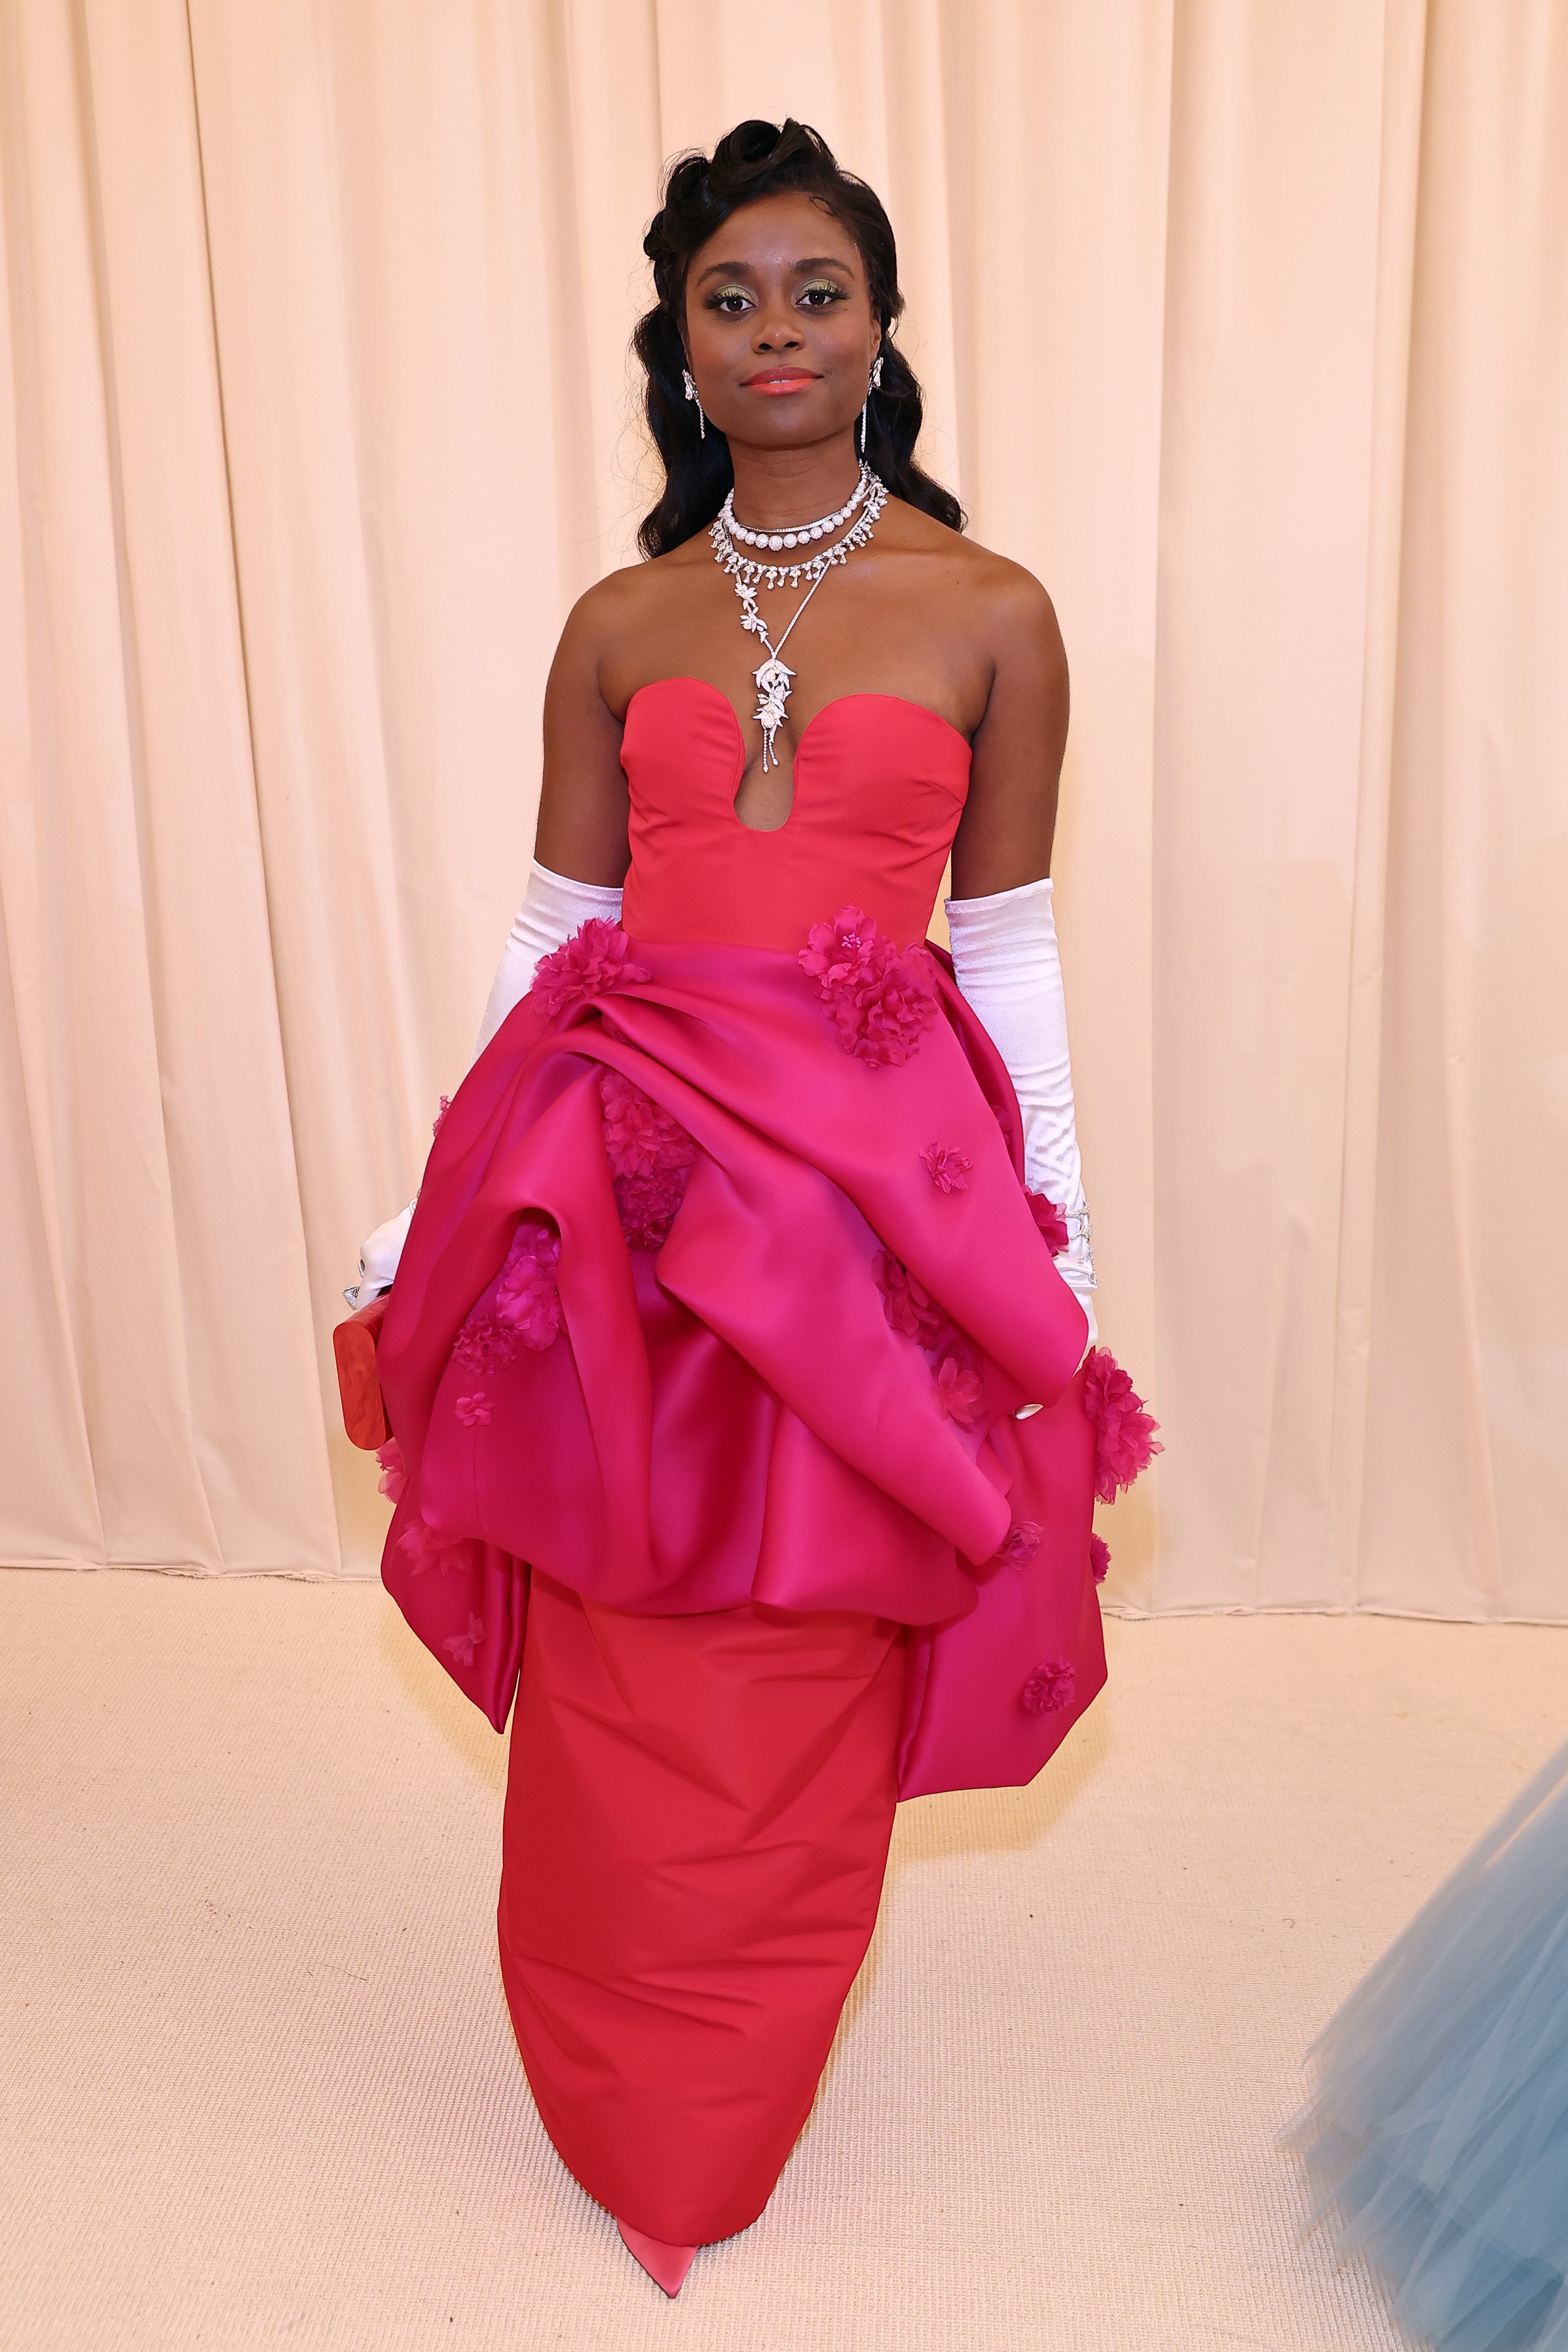 NEW YORK, NEW YORK - MAY 02: (Exclusive Coverage) Denée Benton arrives at The 2022 Met Gala Celebrating "In America: An Anthology of Fashion" at The Metropolitan Museum of Art on May 02, 2022 in New York City. (Photo by Arturo Holmes/MG22/Getty Images for (Foto: Getty Images for The Met Museum/)